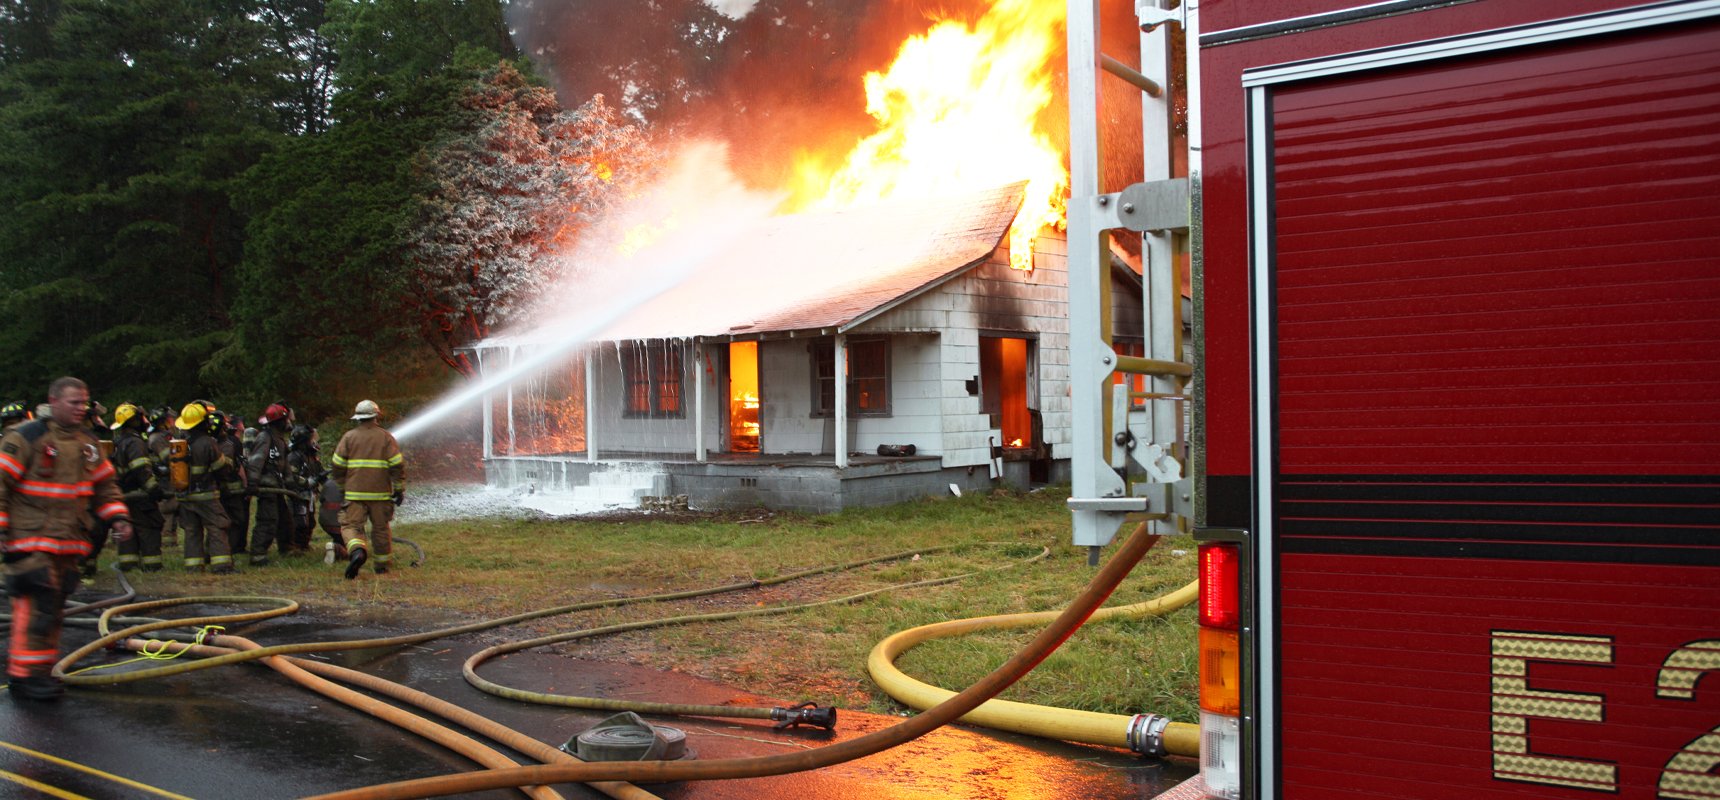 firefighter fighting fire with hose